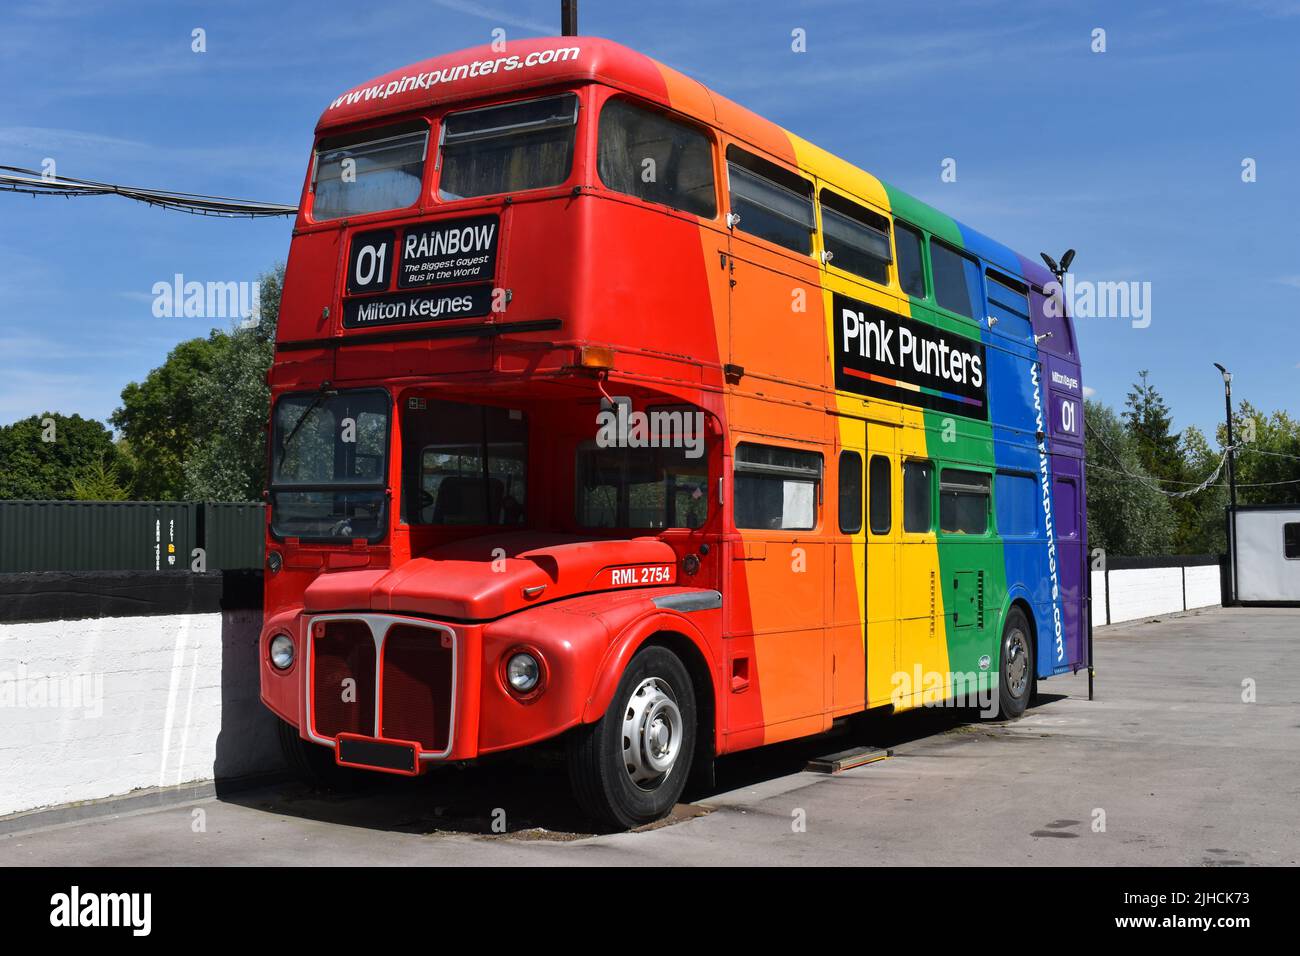 The Pink Punters rainbow-coloured double decker routemaster bus. Stock Photo